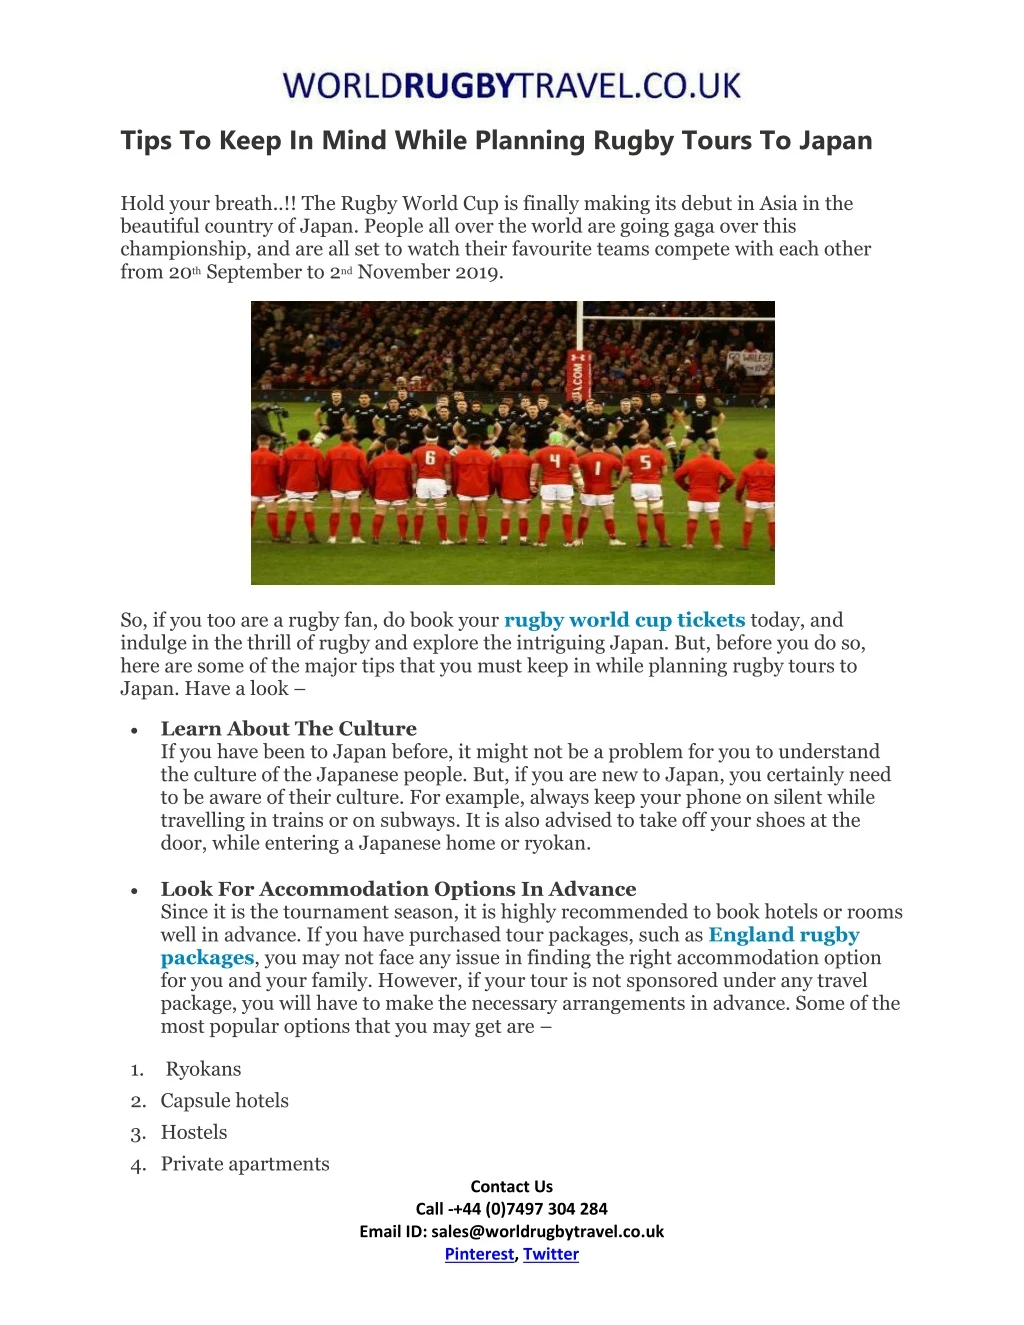 tips to keep in mind while planning rugby tours